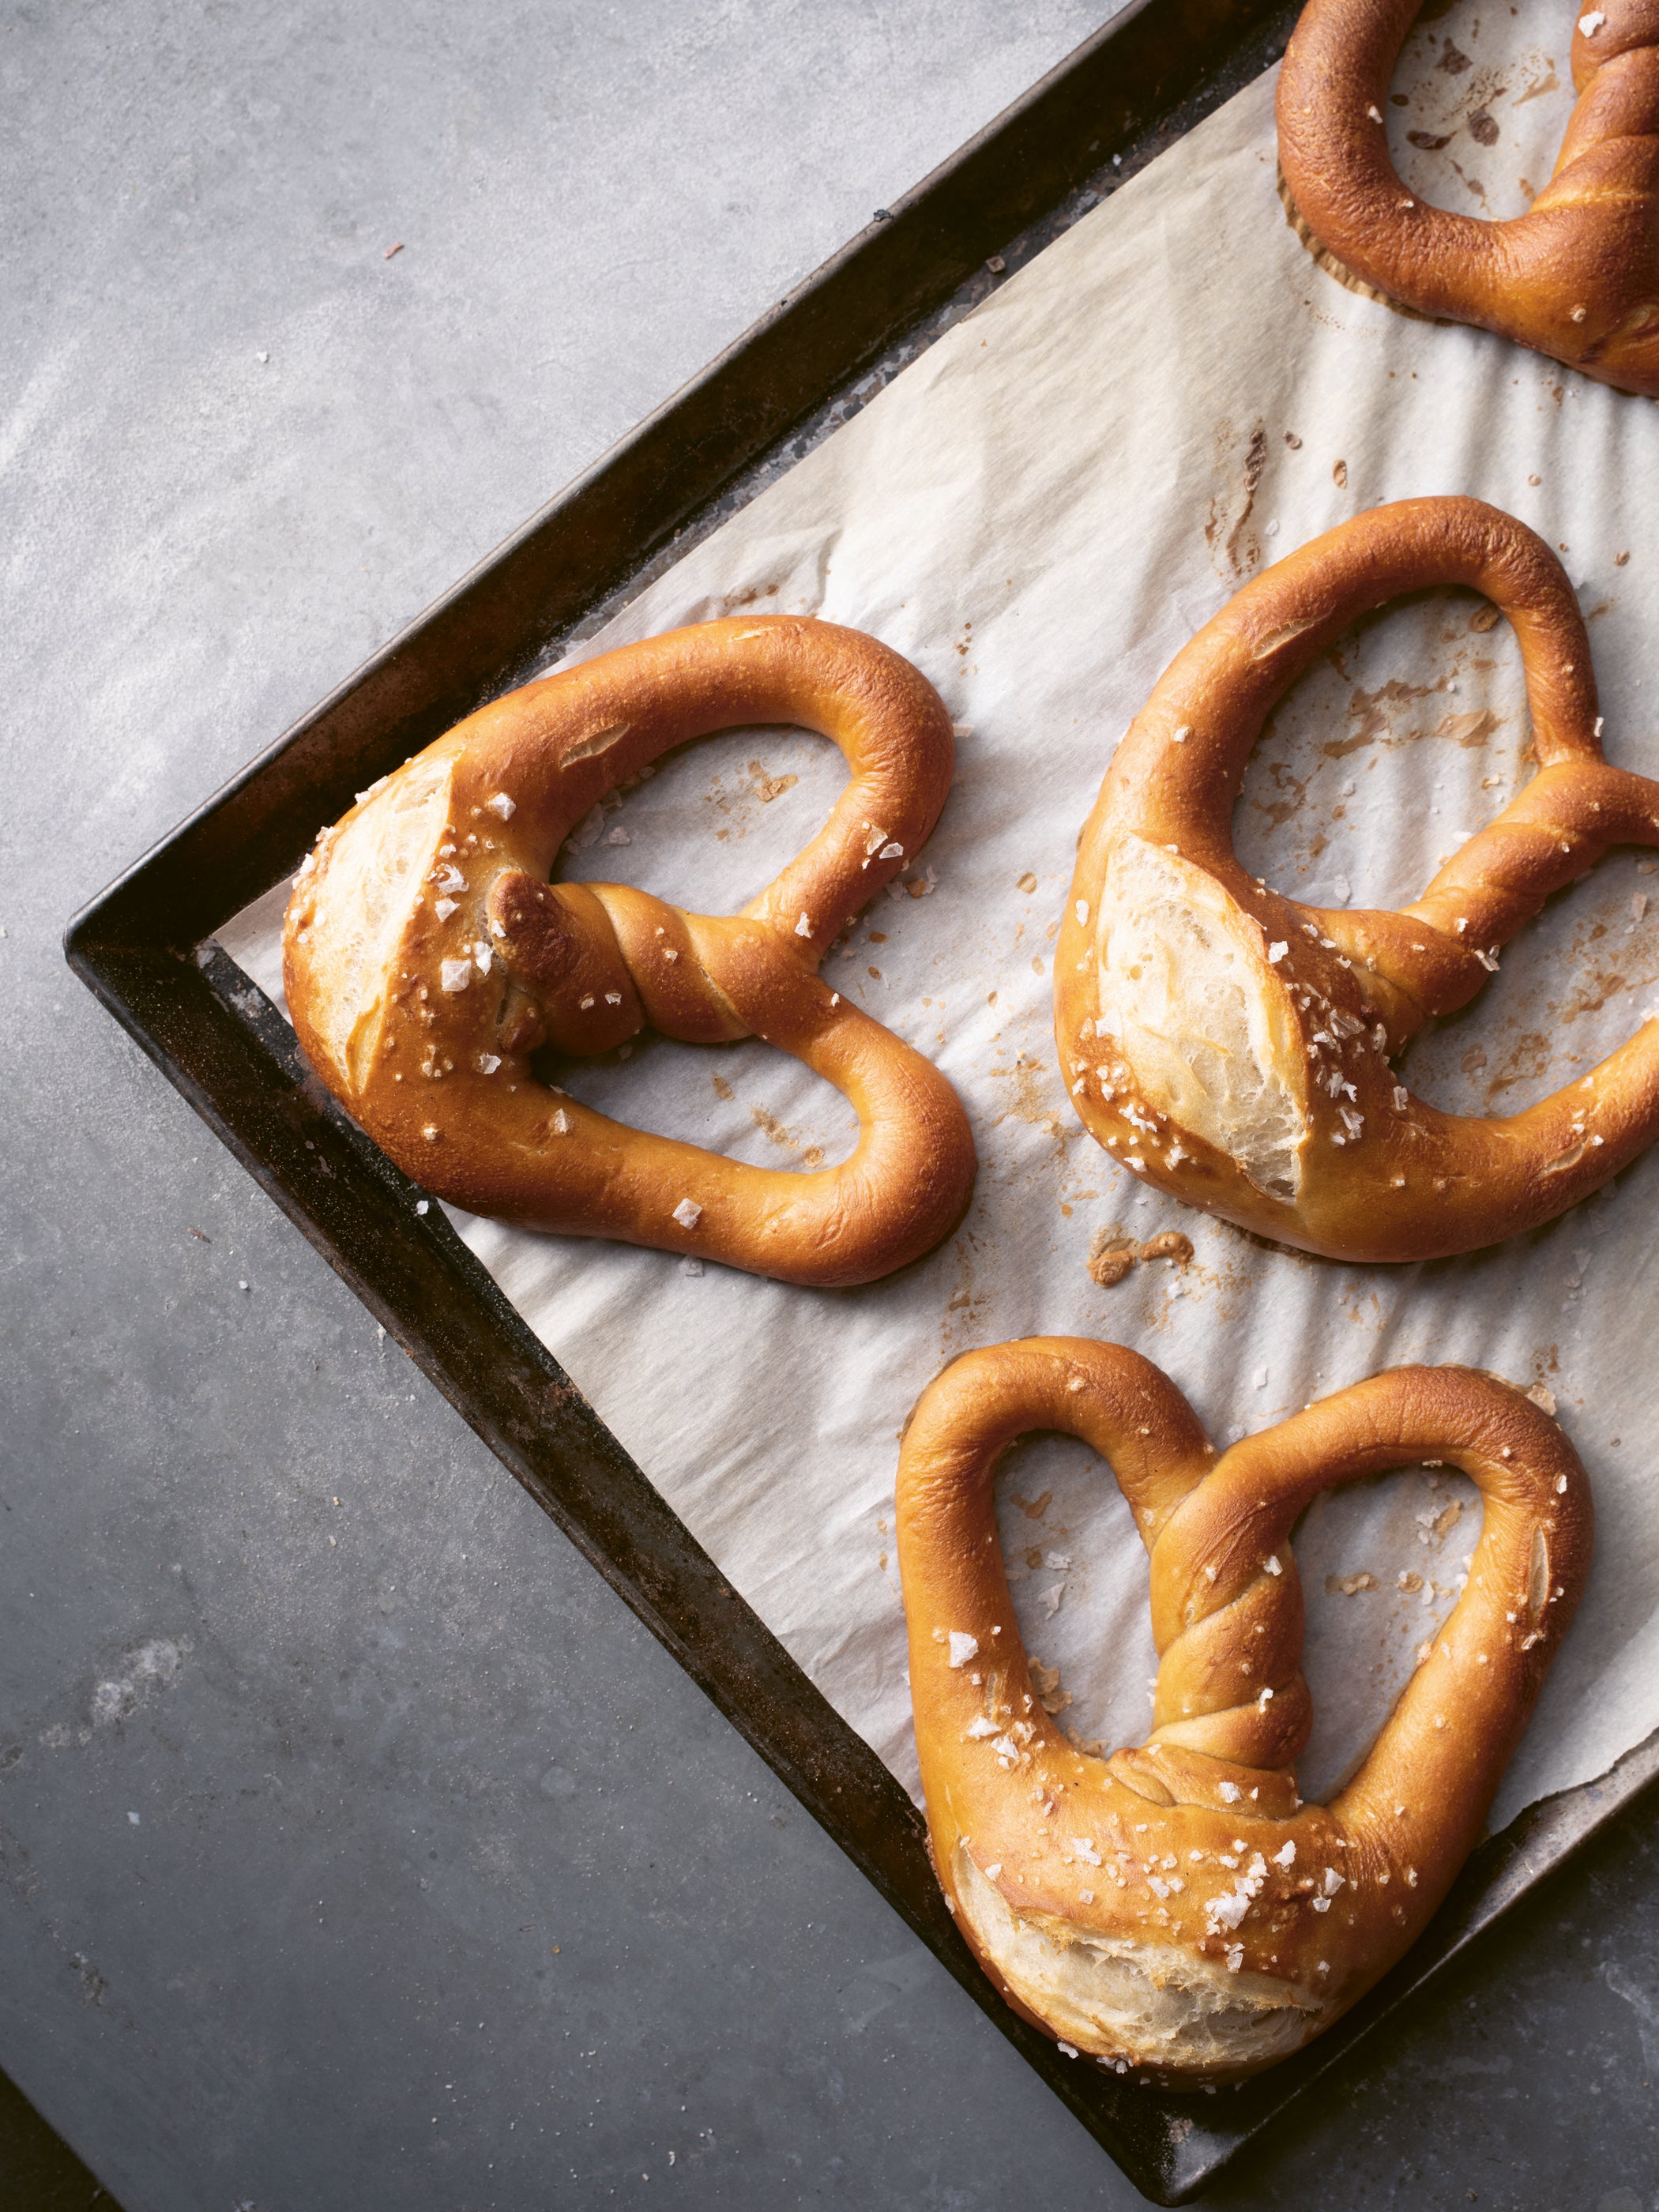 Pretzels are fine just baked on baking trays, as we’re not after a supremely crisp base